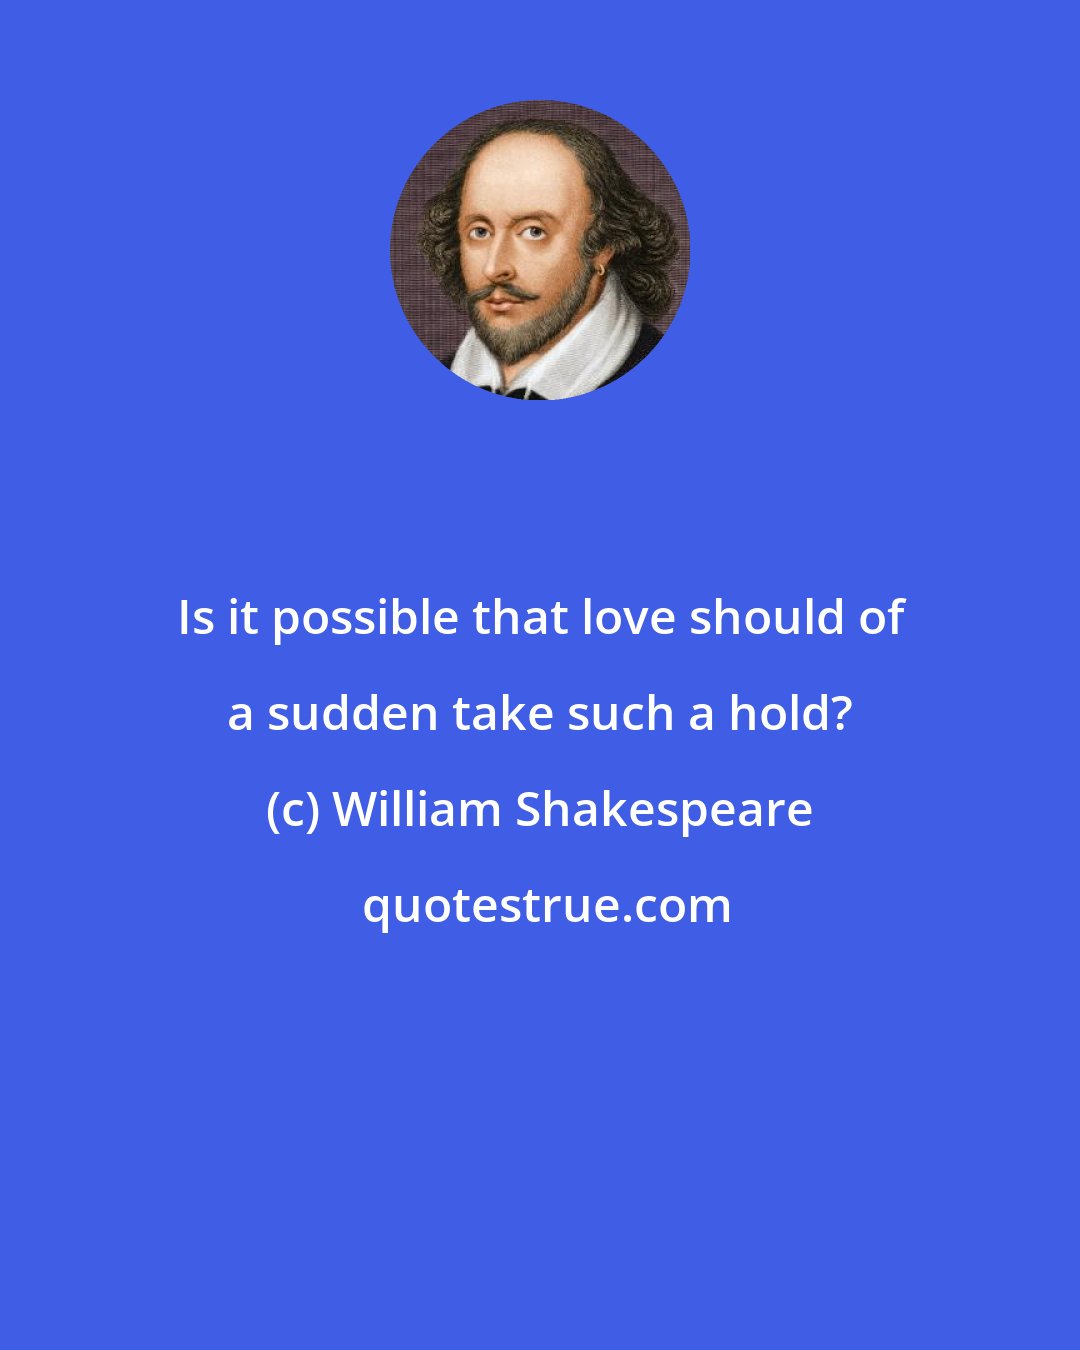 William Shakespeare: Is it possible that love should of a sudden take such a hold?